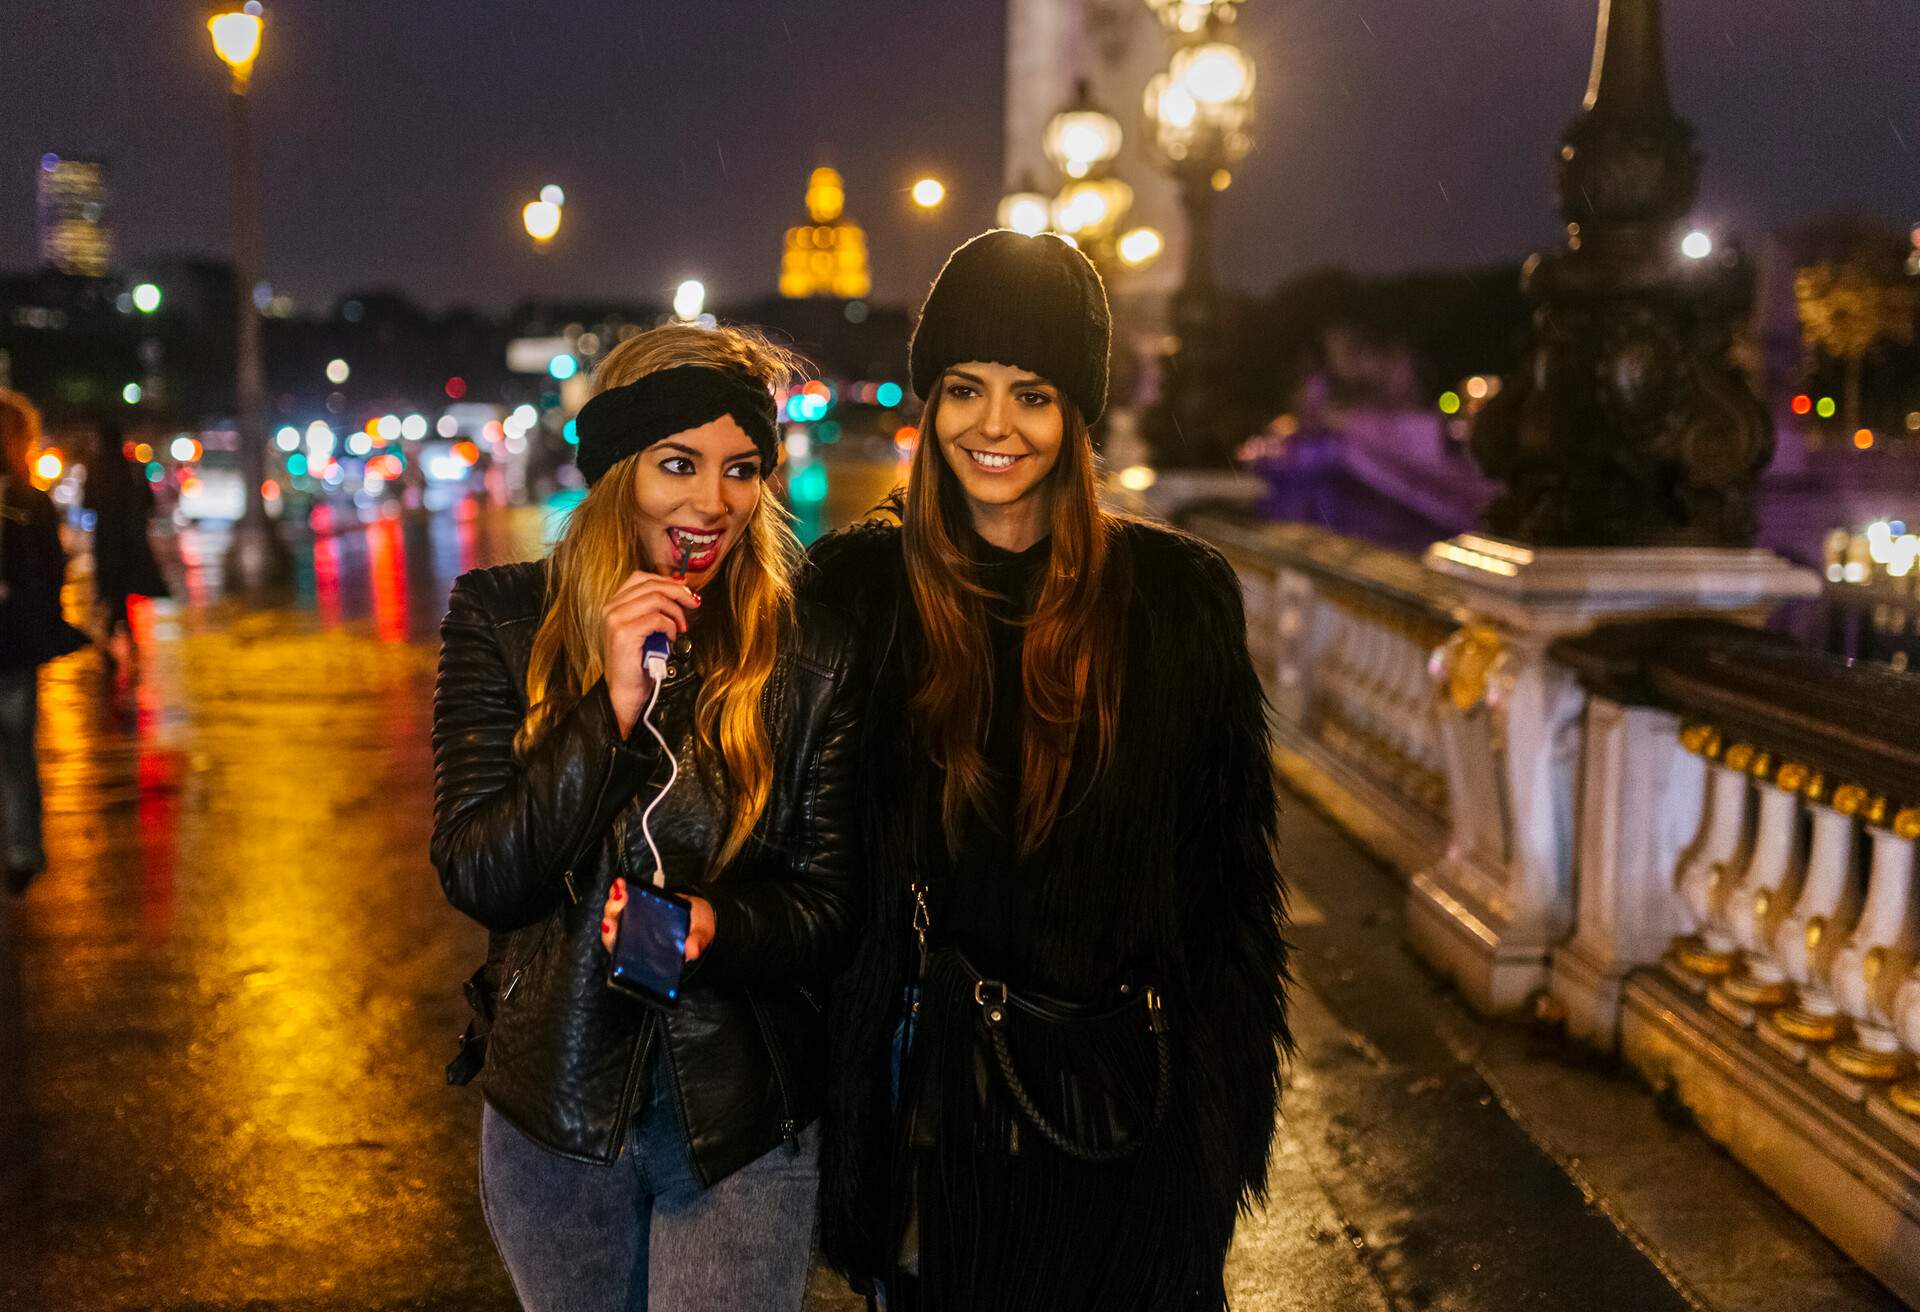 Two women dressed in black winter attire walk on a bridge with a blurred, damp background.